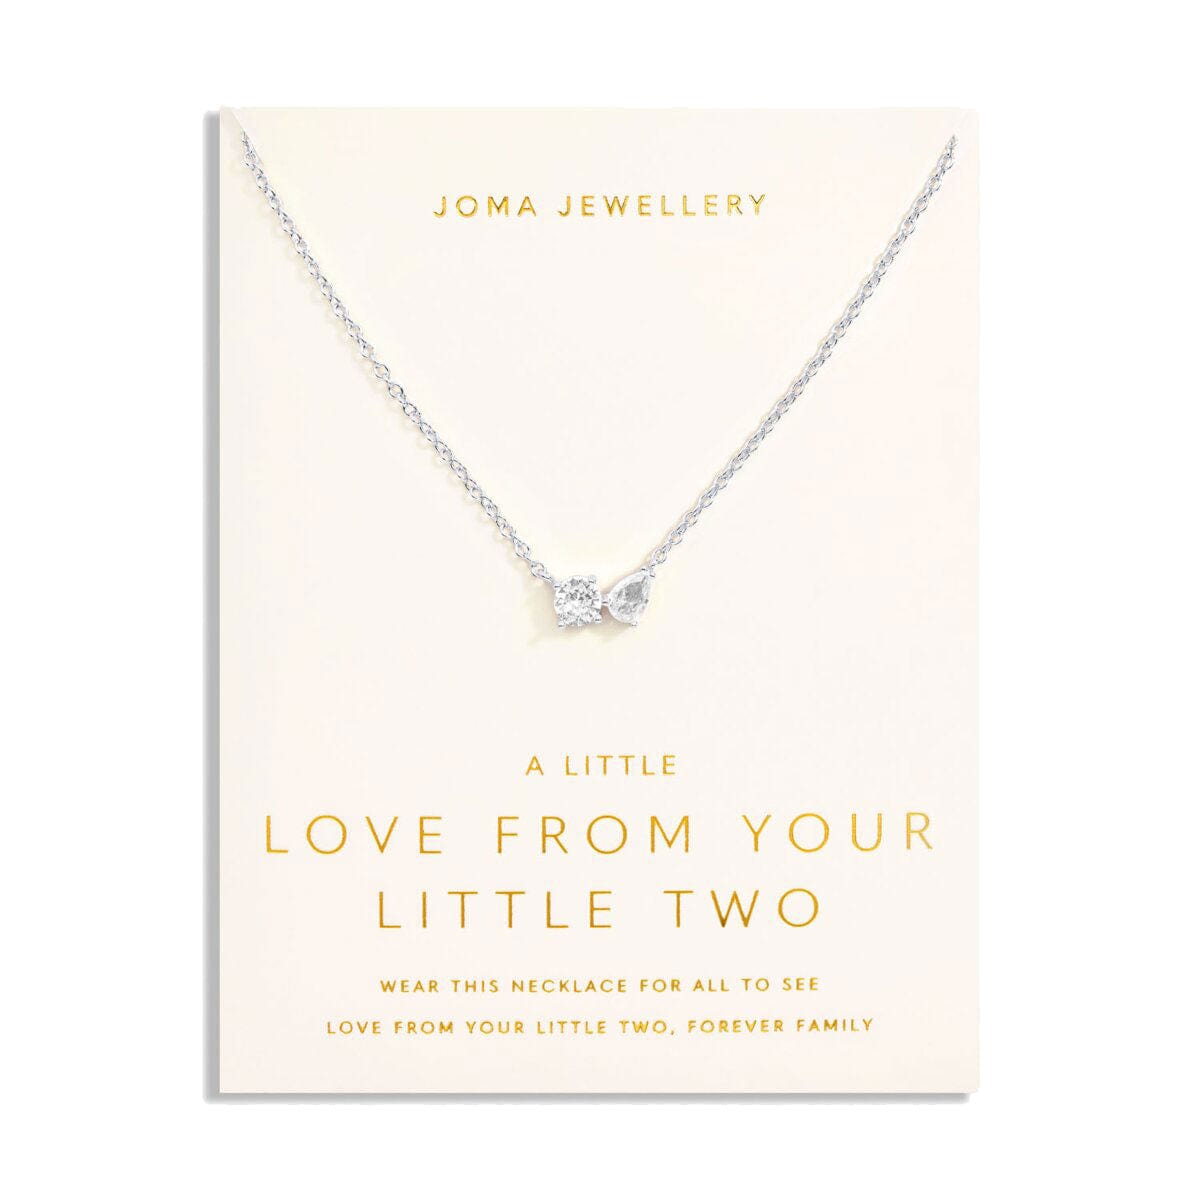 Joma Jewellery Necklace Joma Jewellery Love From Your Little Two Necklace